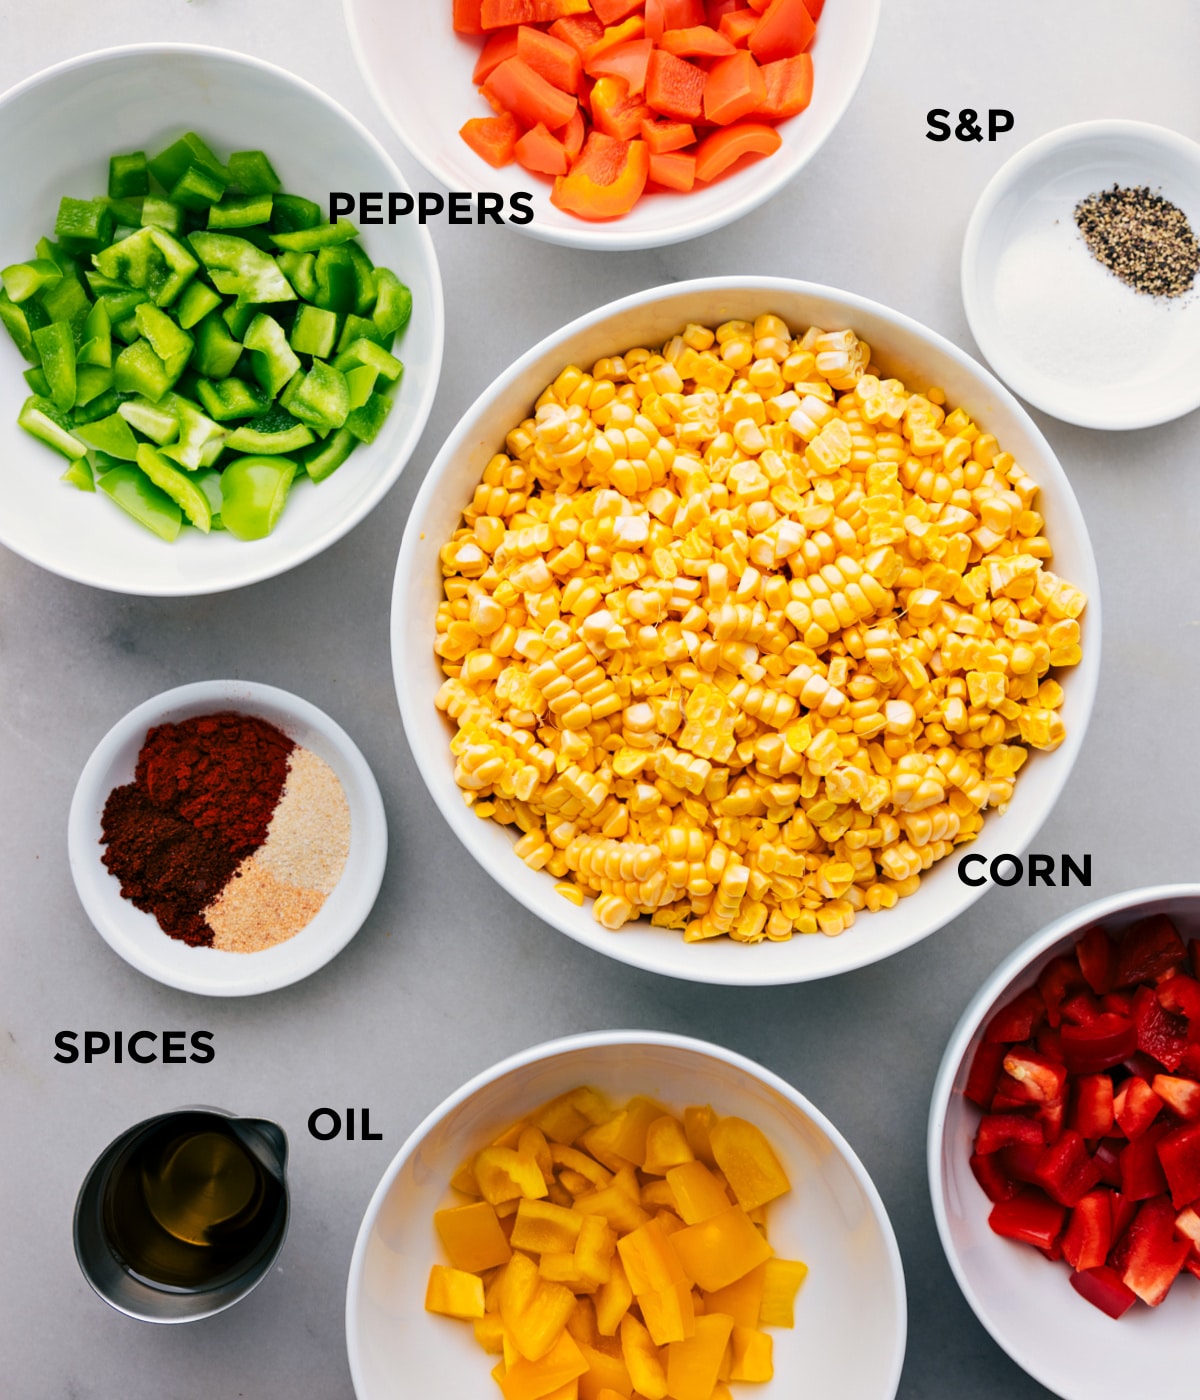 All the ingredients in this recipe including the corn, peppers, oil, spices, and seasonings prepped out for easy assembly.